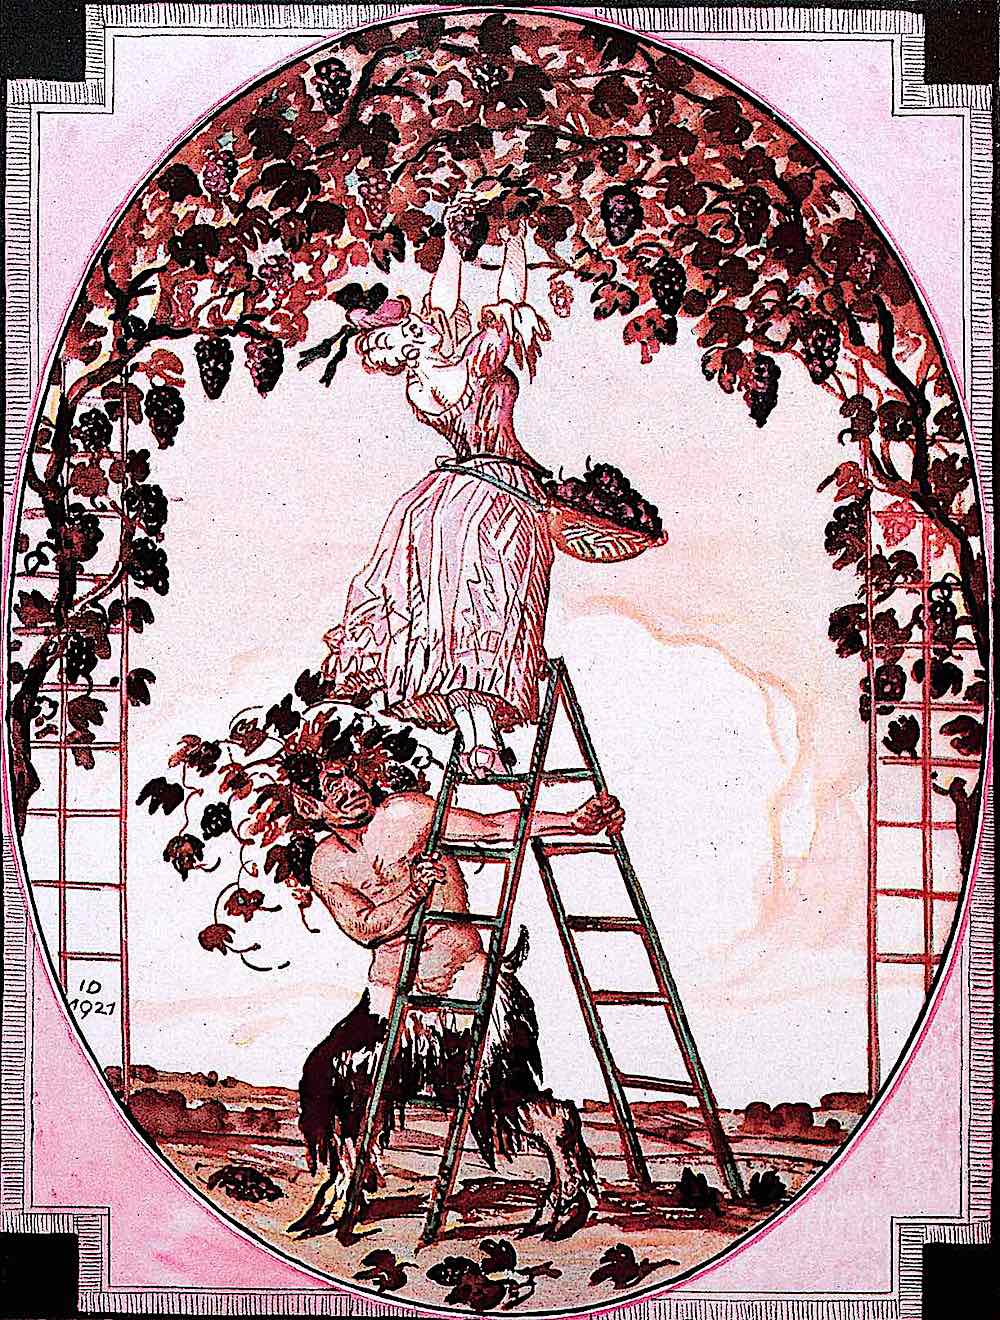 a Julius Diez 1927 illustration of a satyr steading a ladder and peeping up a woman's skirt